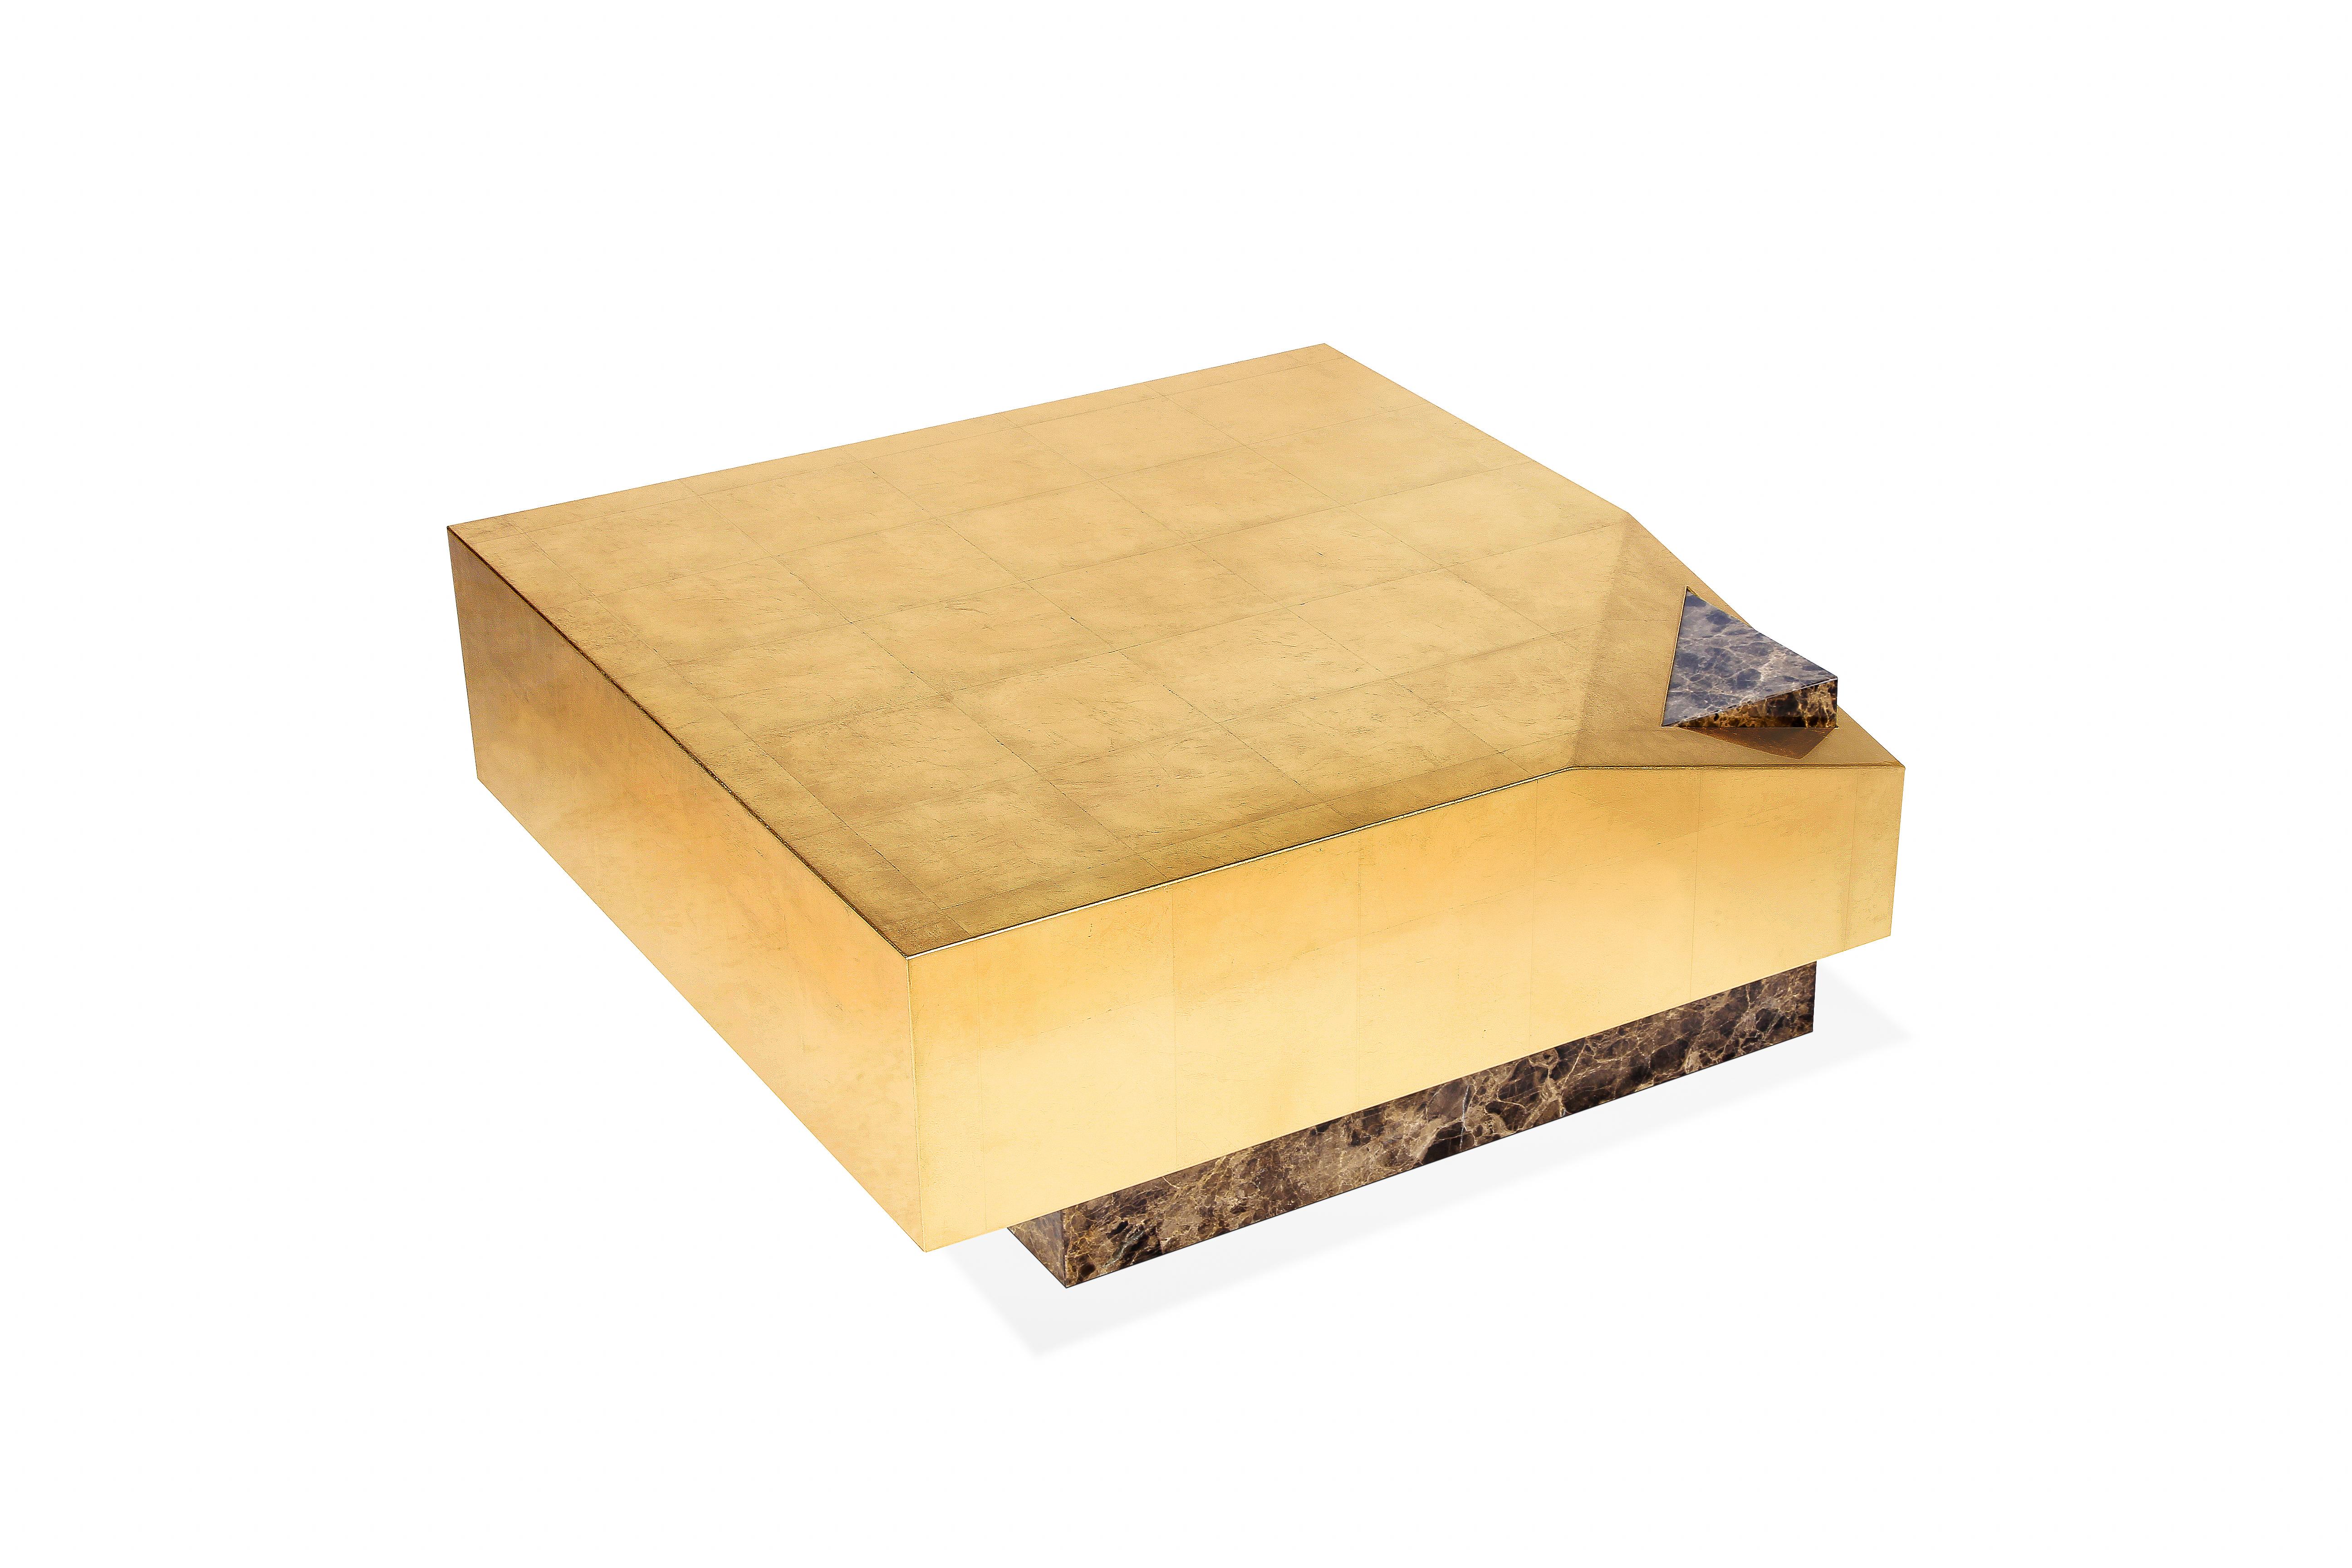 Vaz center table by Royal Stranger.
Dimensions: 80 x 80 x 32 cm.
Materials: Emperador Marble with polished finish with gold leaf top with glossy finish.

Inspired by the merchant marine and the Portuguese Discoveries, the Vaz center table is